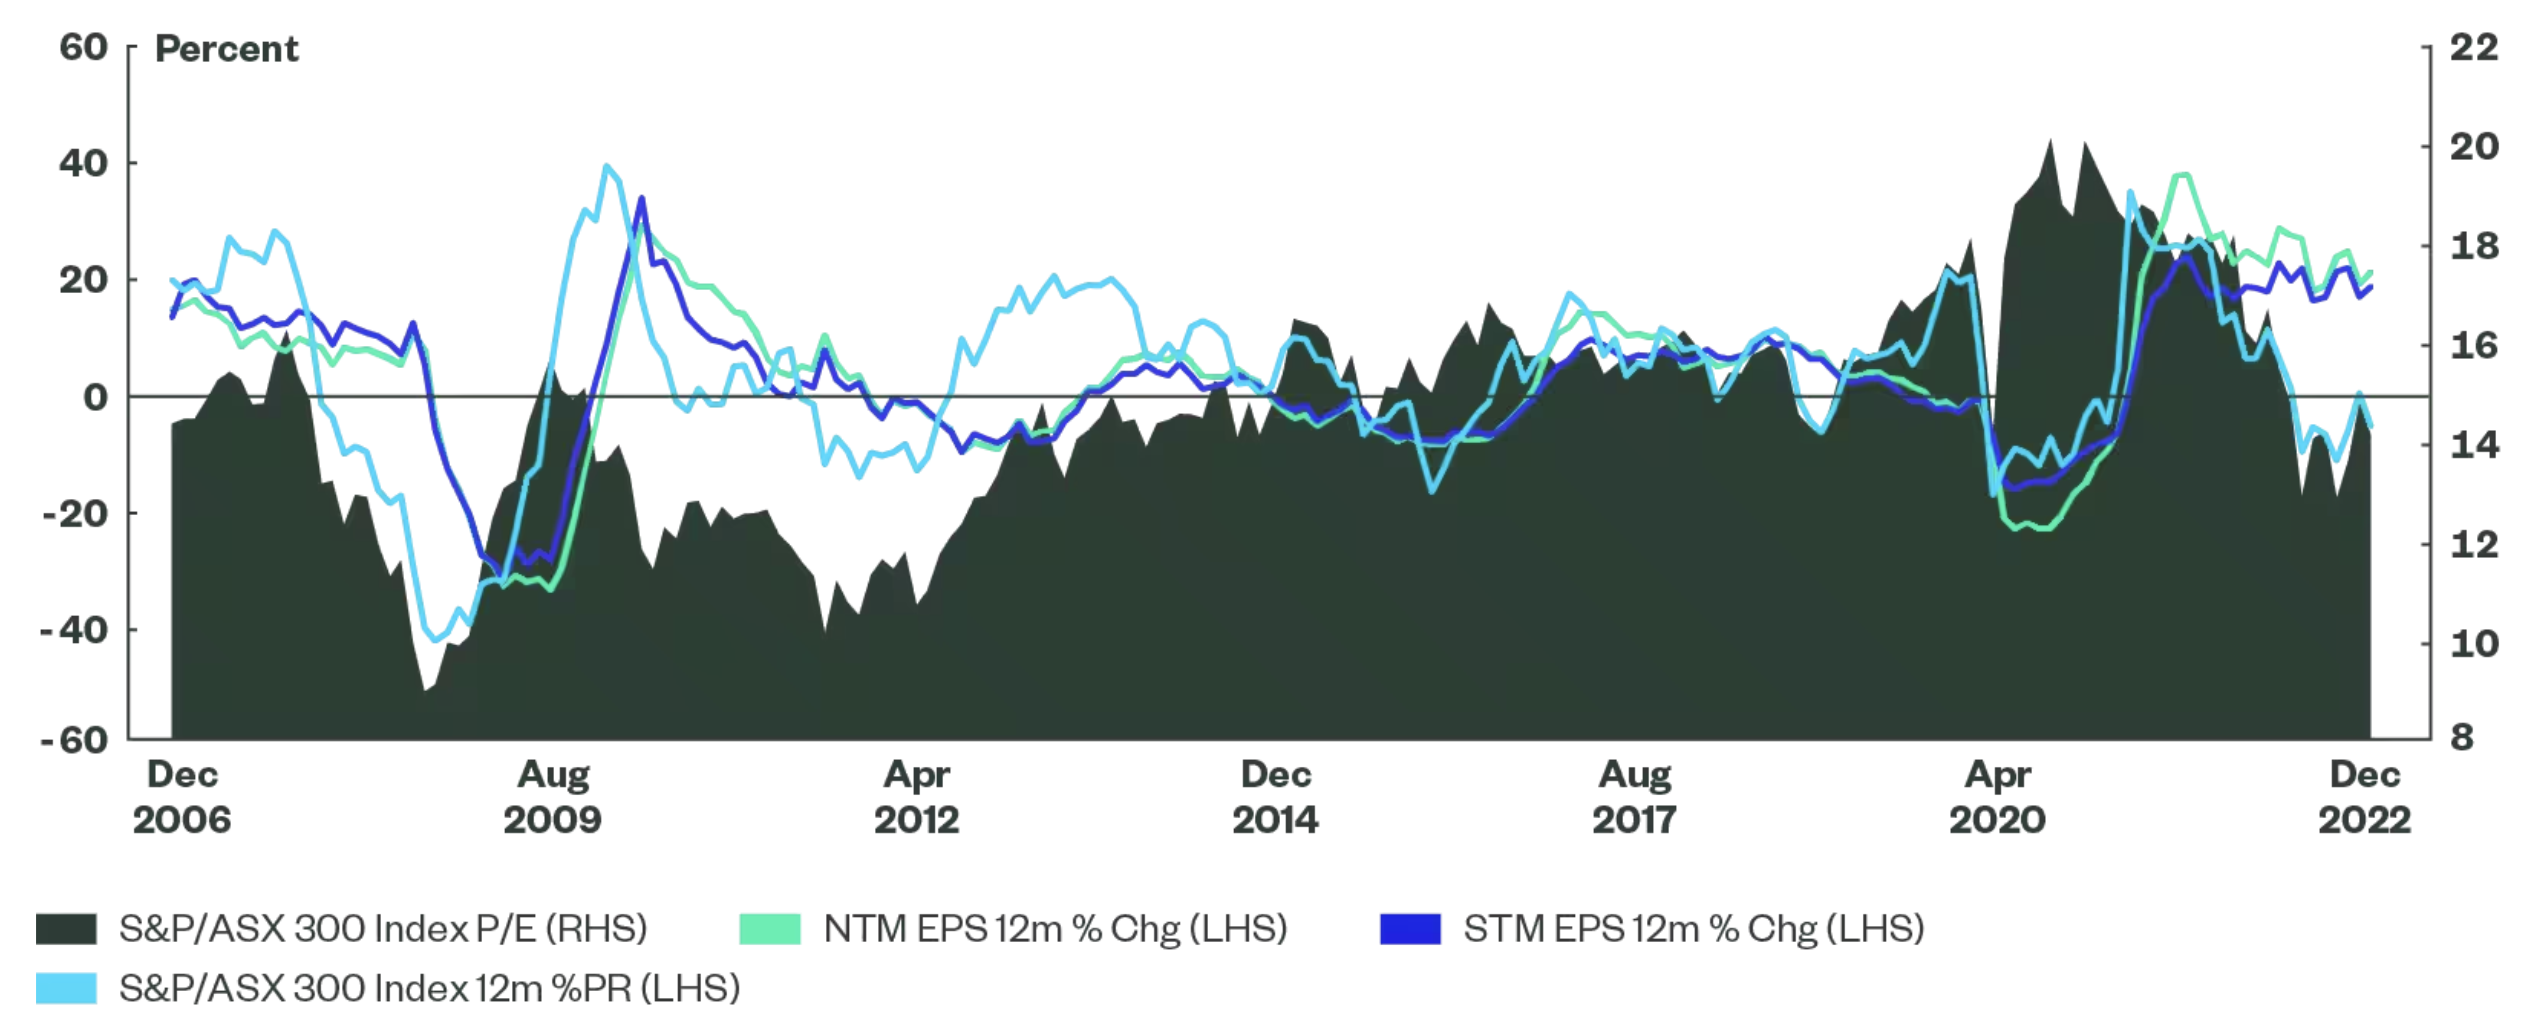 Source: Factset, as of 31 December 2022. Past performance is not a reliable indicator of future performance. Index returns reflect capital gains and losses, income, and the reinvestment of dividends. Index returns are unmanaged and do not reflect the deduction of any fees or expenses. EPS = Earnings Per Share. NTM = Next Twelve Months. STM = Second Twelve Months.